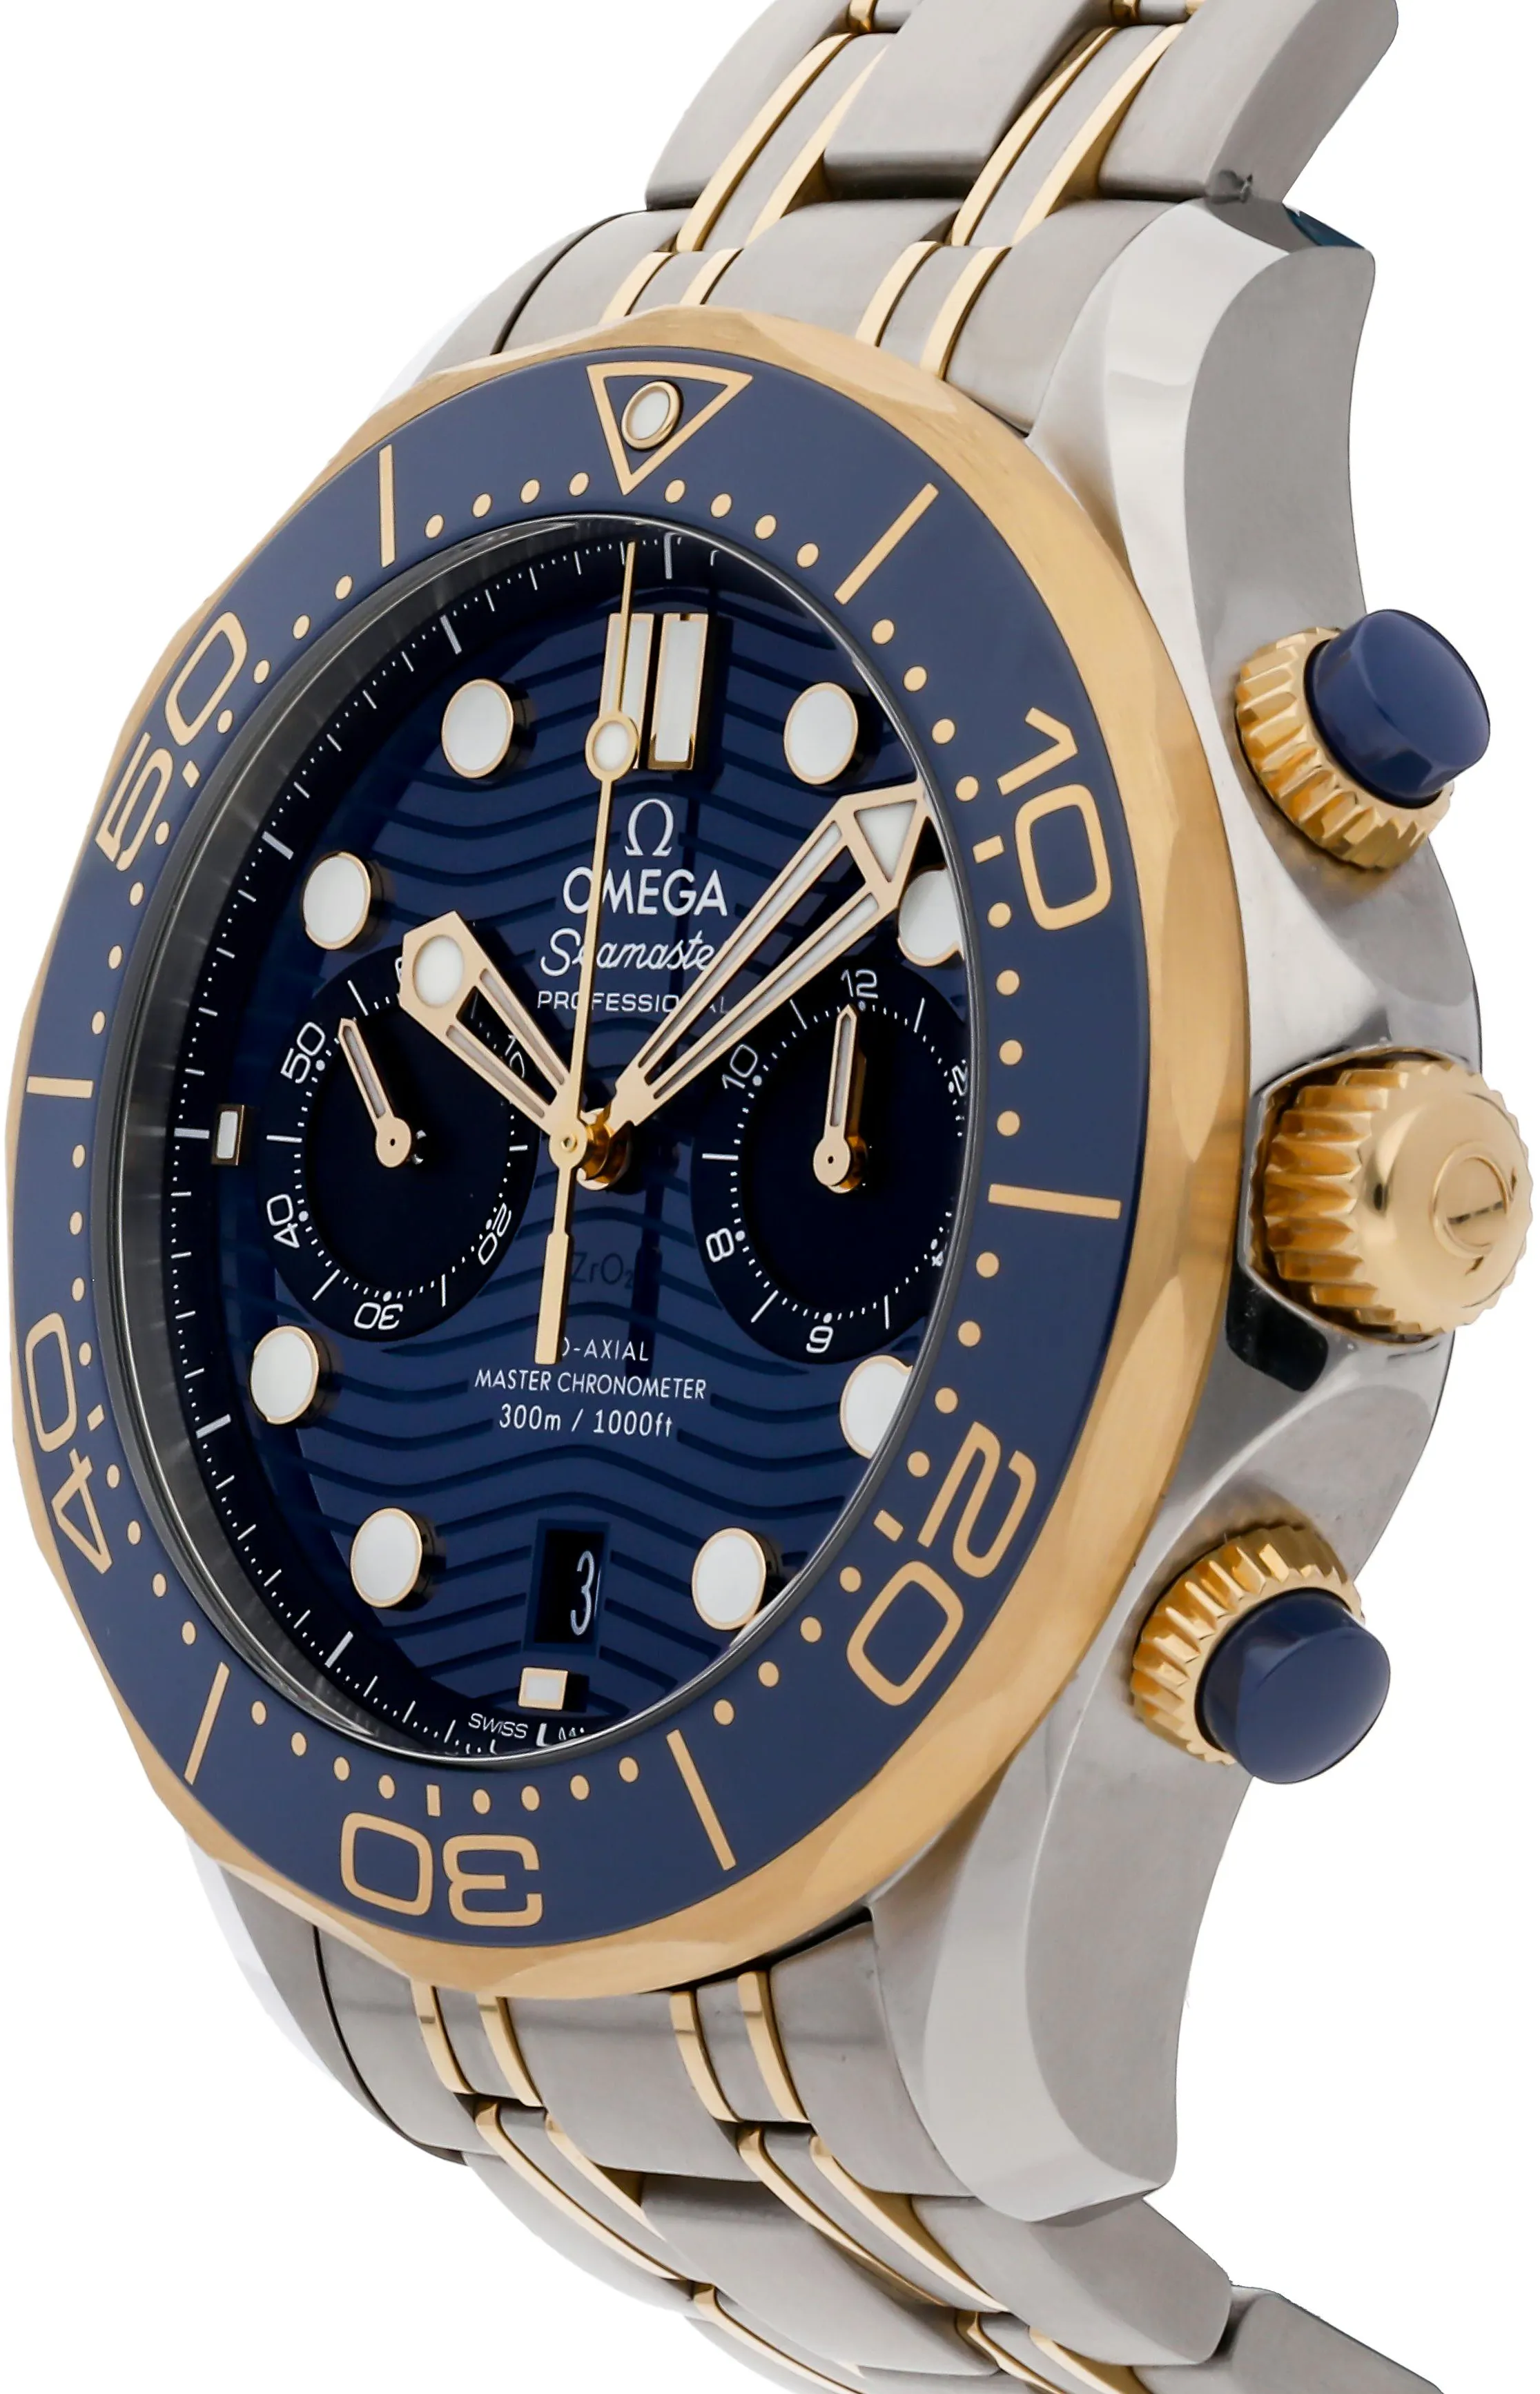 Omega Seamaster Diver 300M 210.20.44.51.03.001 44mm Stainless steel Blue 1